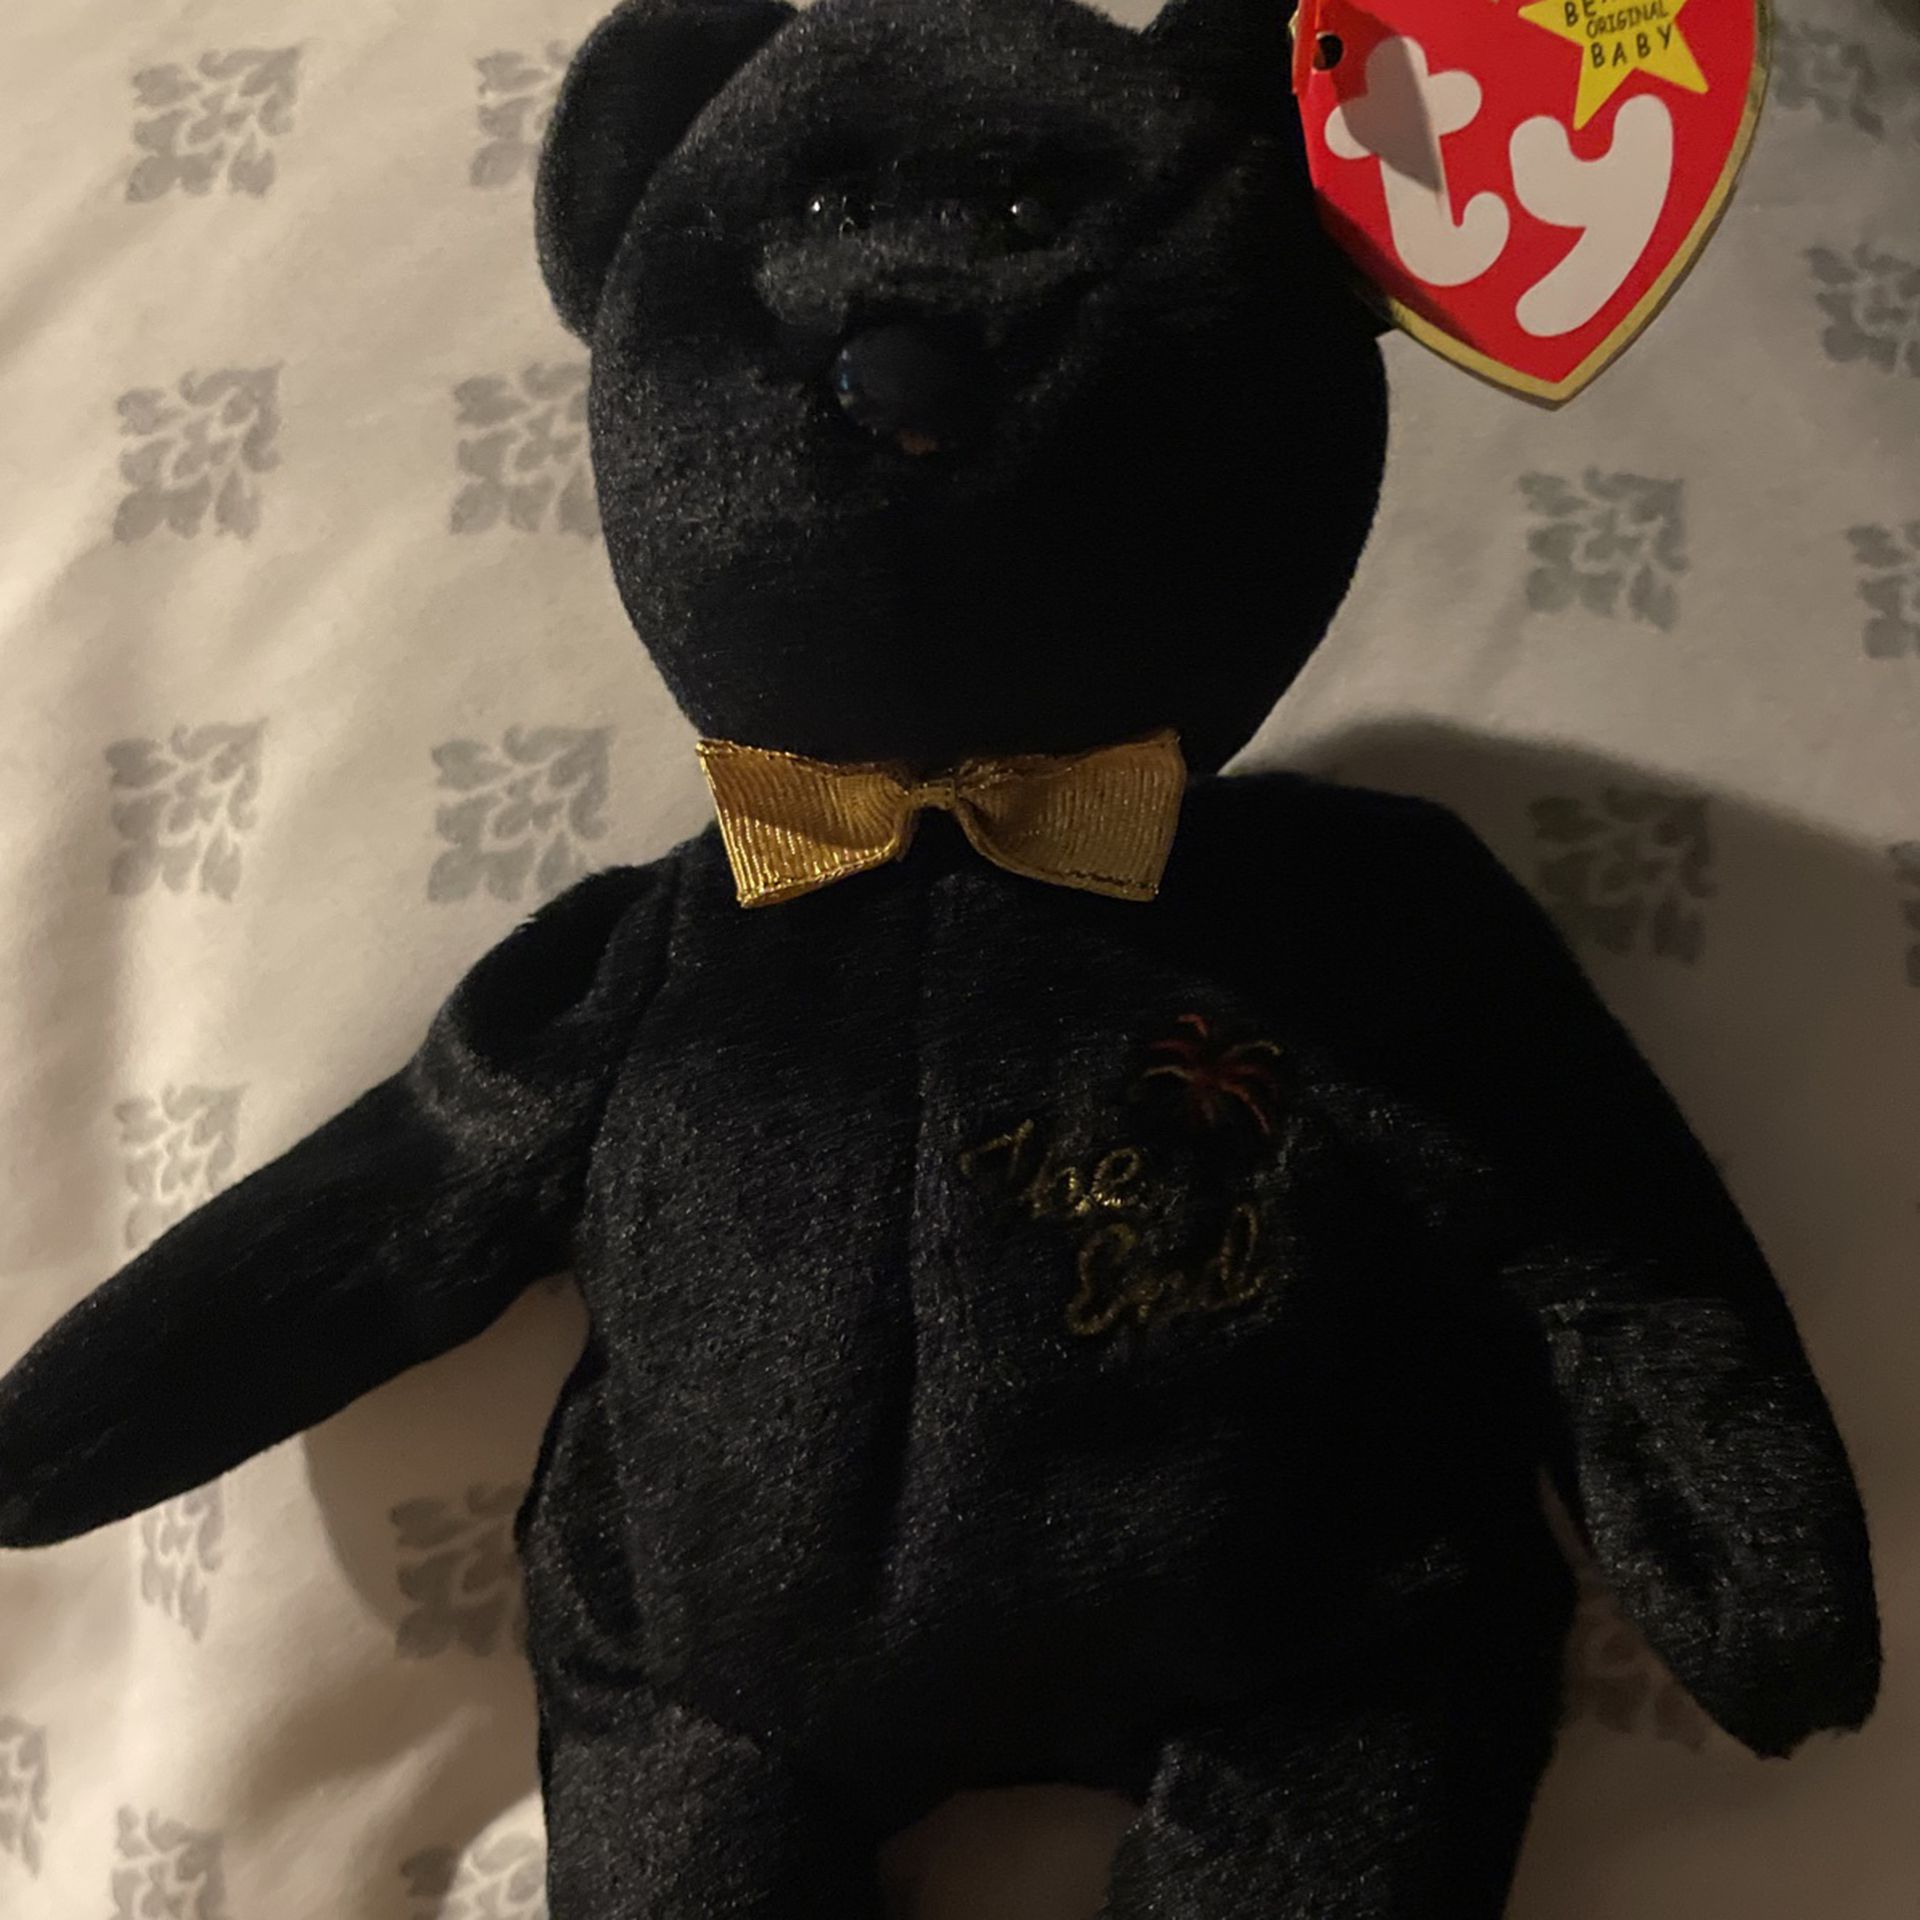 Beanie Baby “The End”